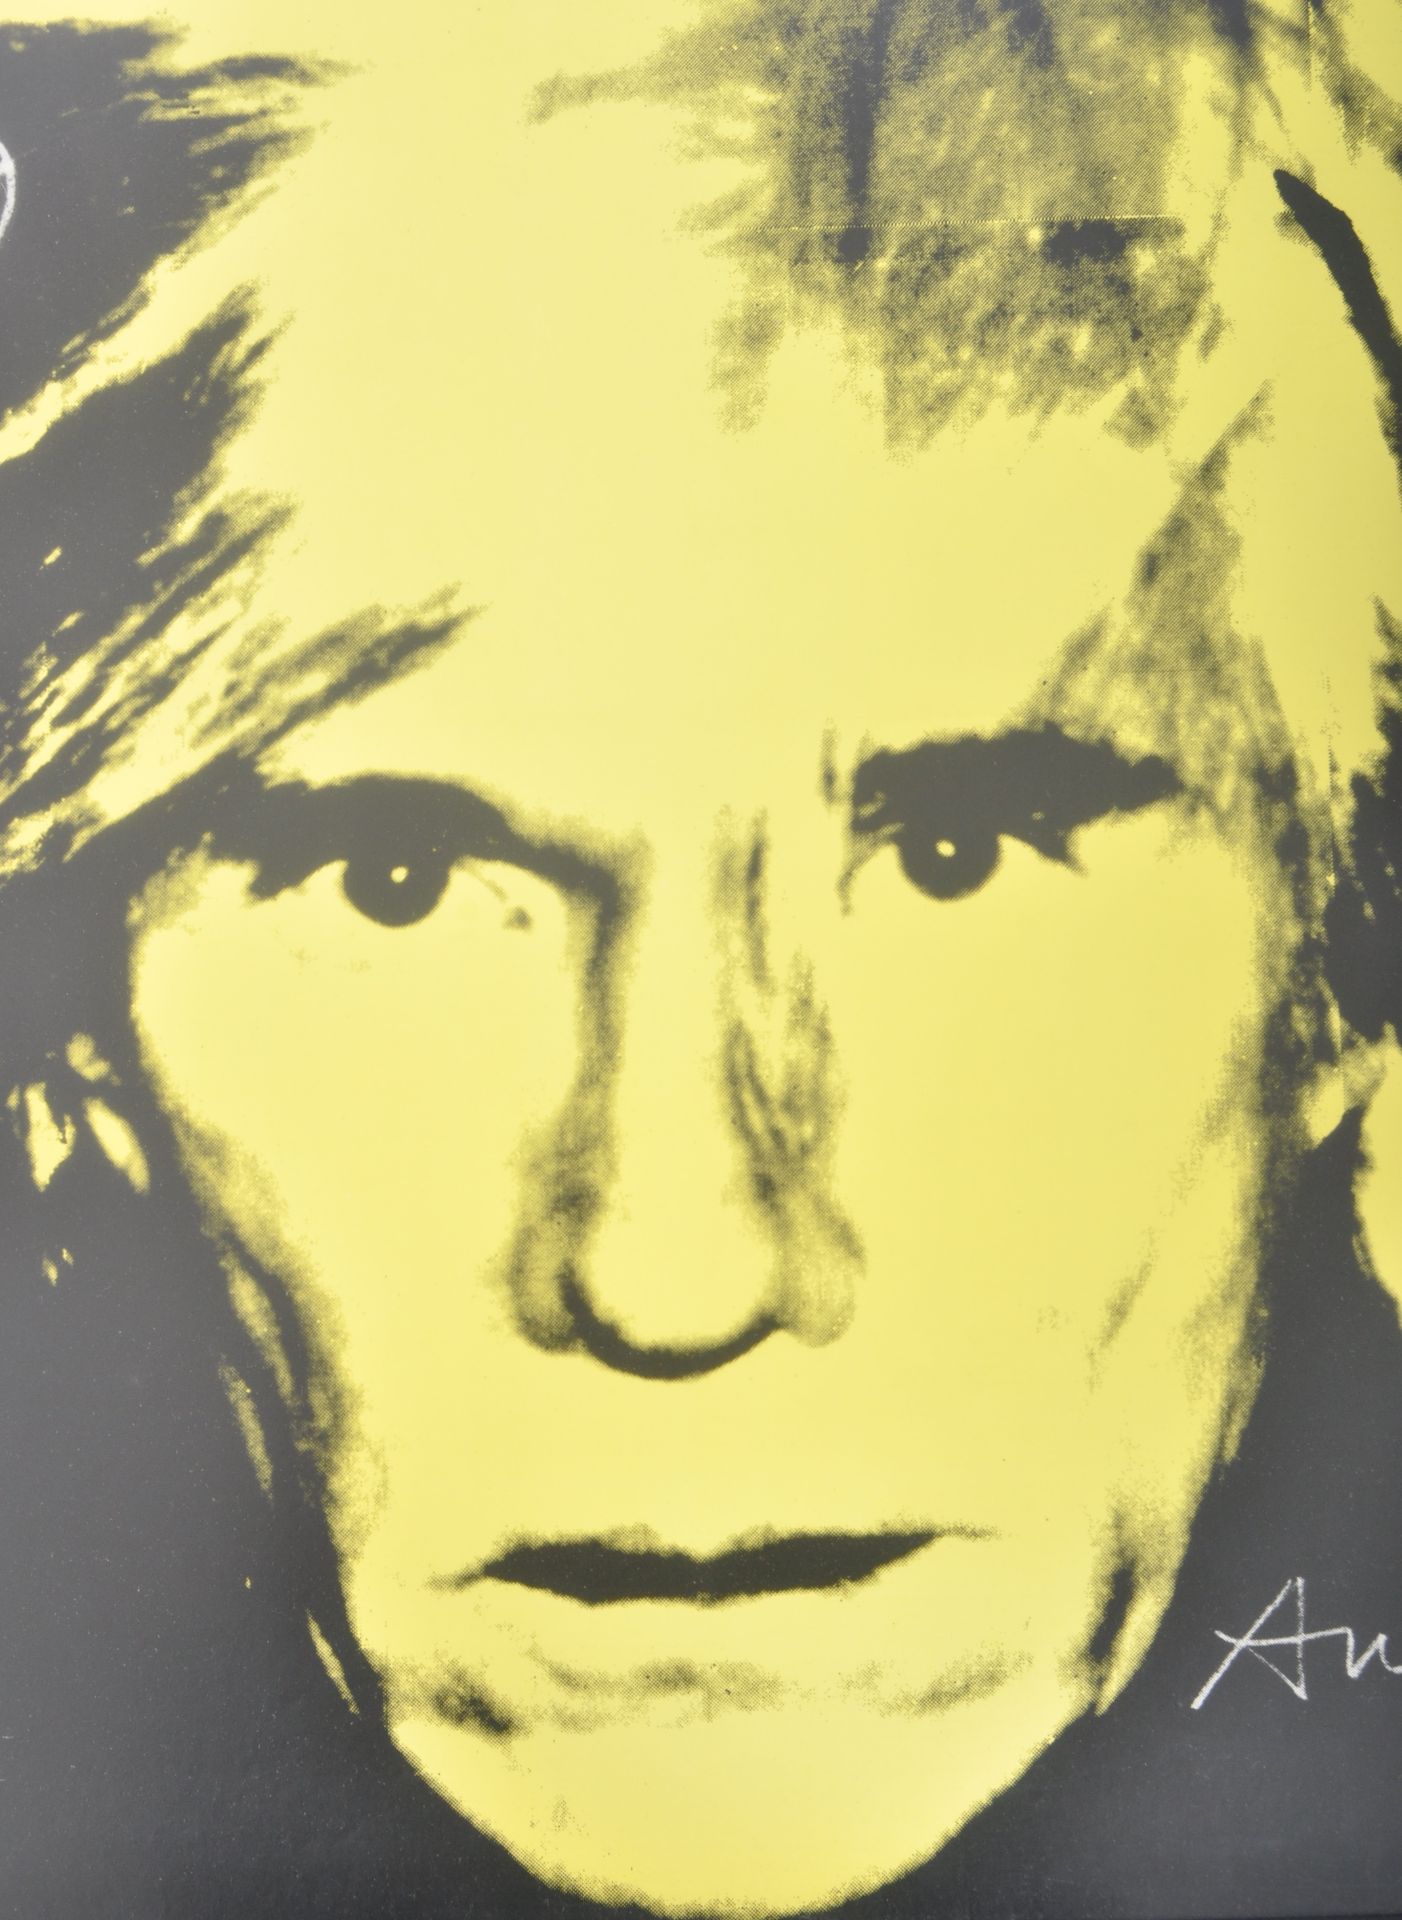 AFTER ANDY WARHOL - WILLIAMS COLLEGE LITHOGRAPH - Image 3 of 4